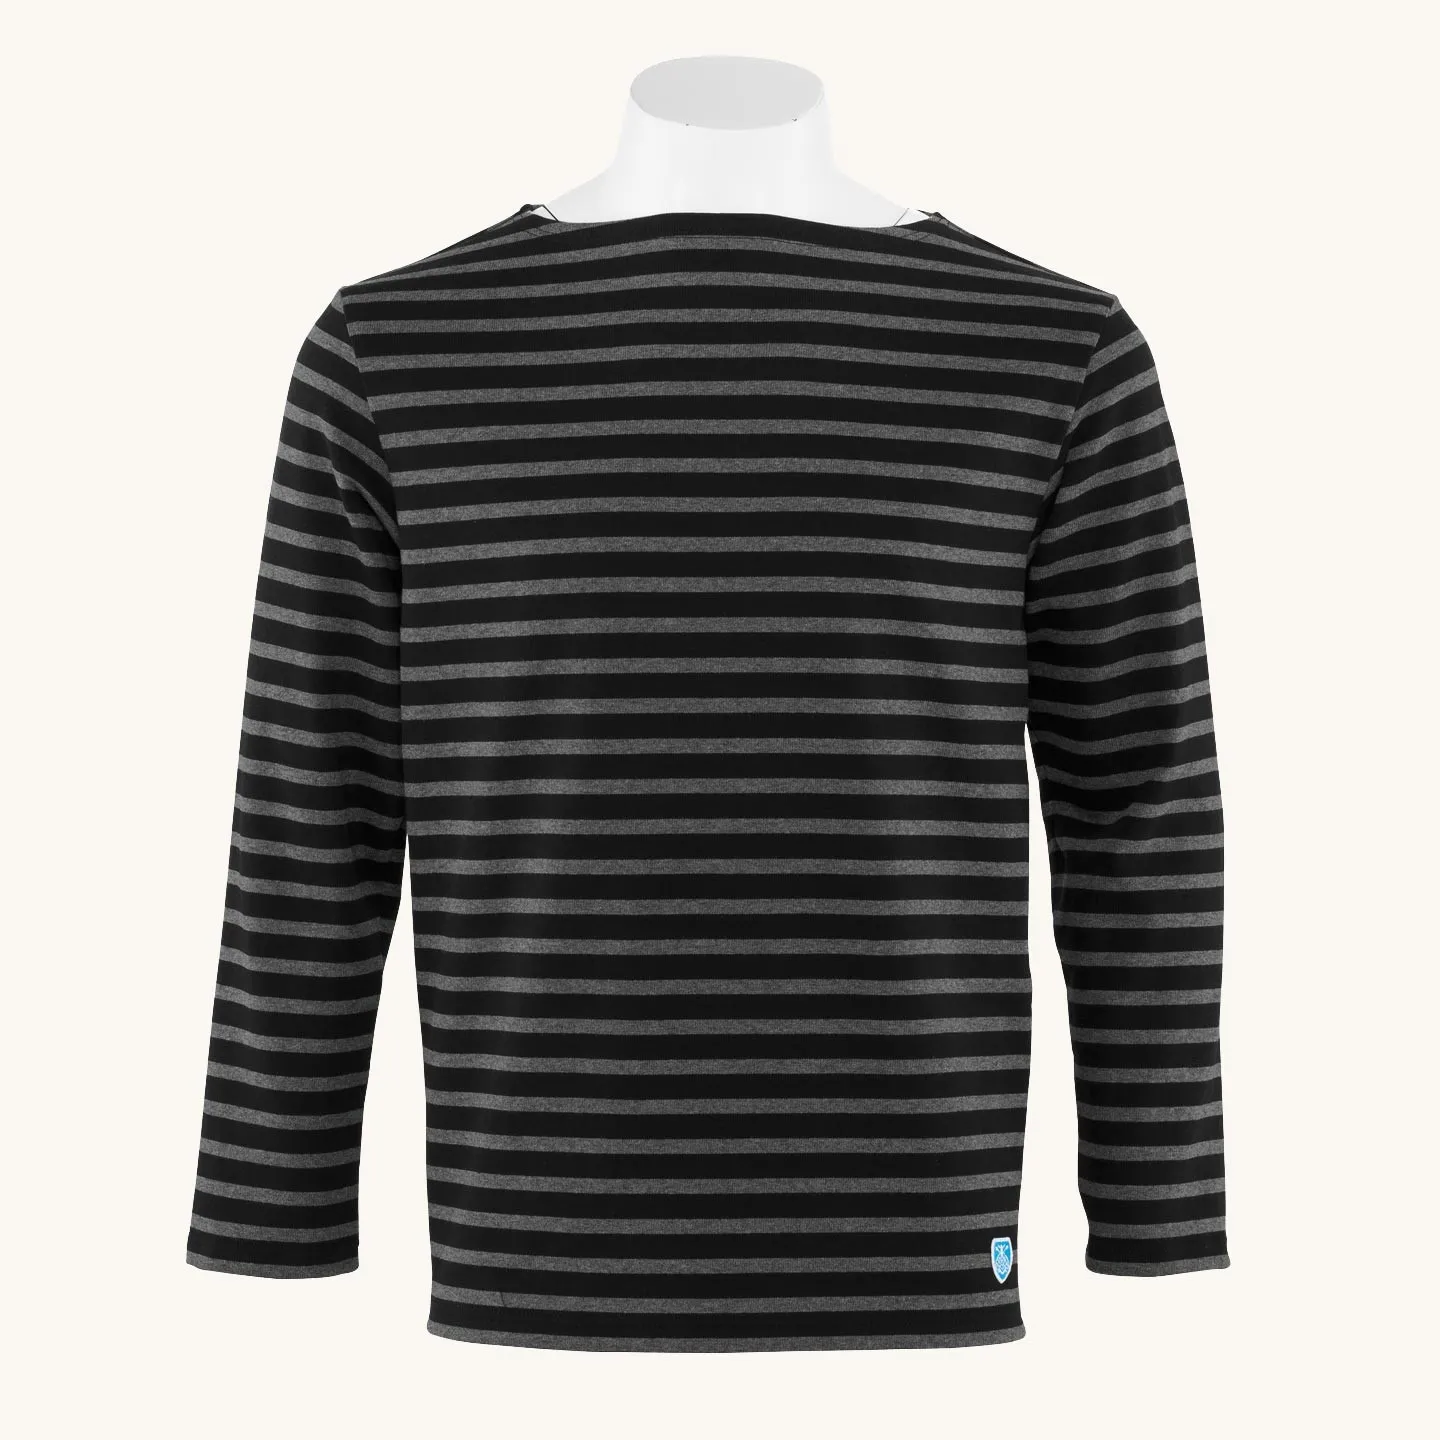 Striped shirt Darkness / Leaden Grey, unisex Orcival